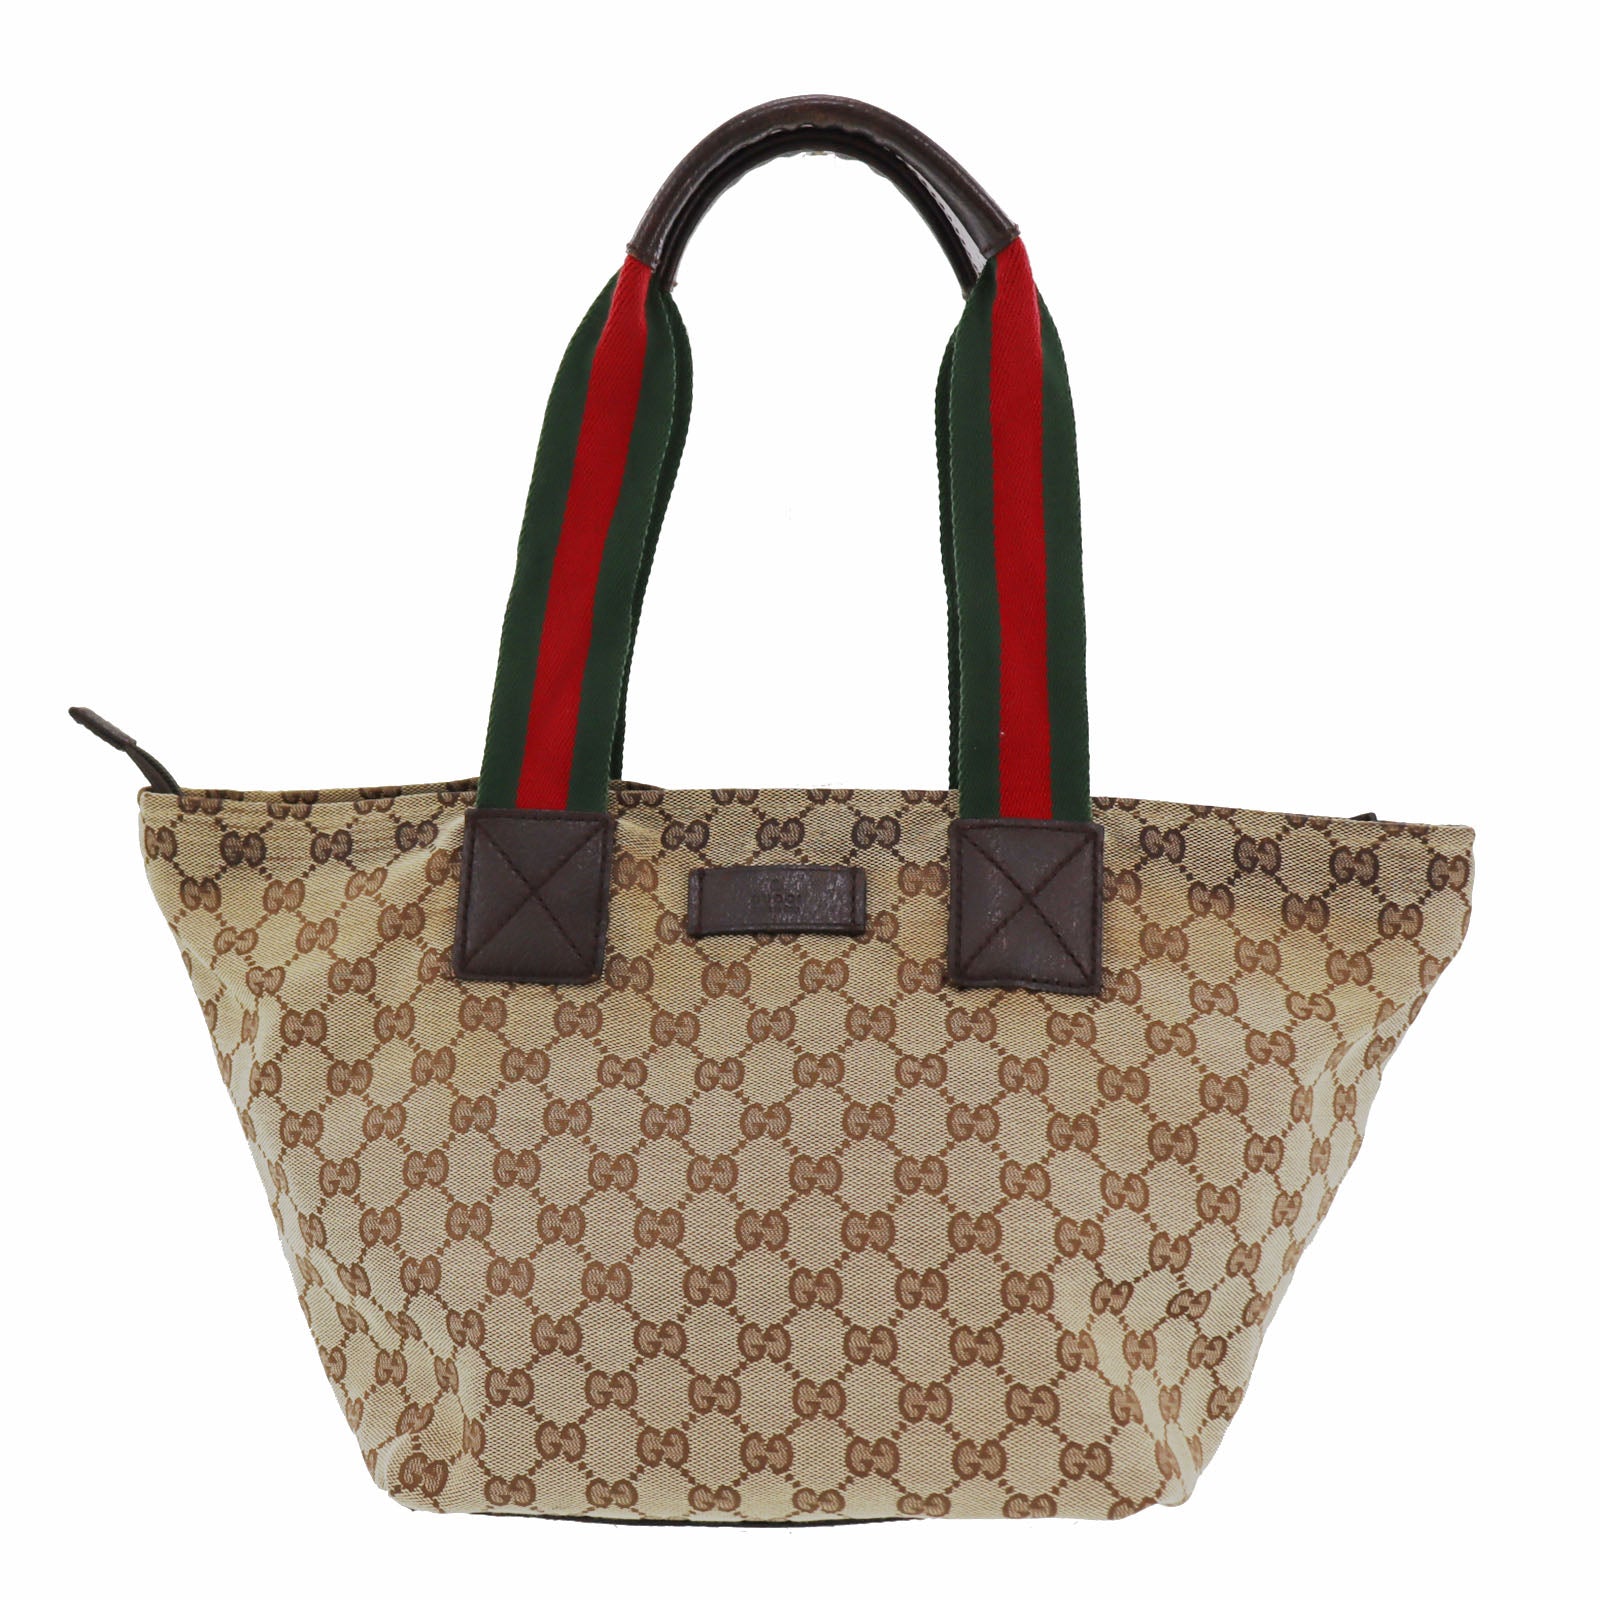 Used Italian GUCCI Black Tote Bag with traces of use on the